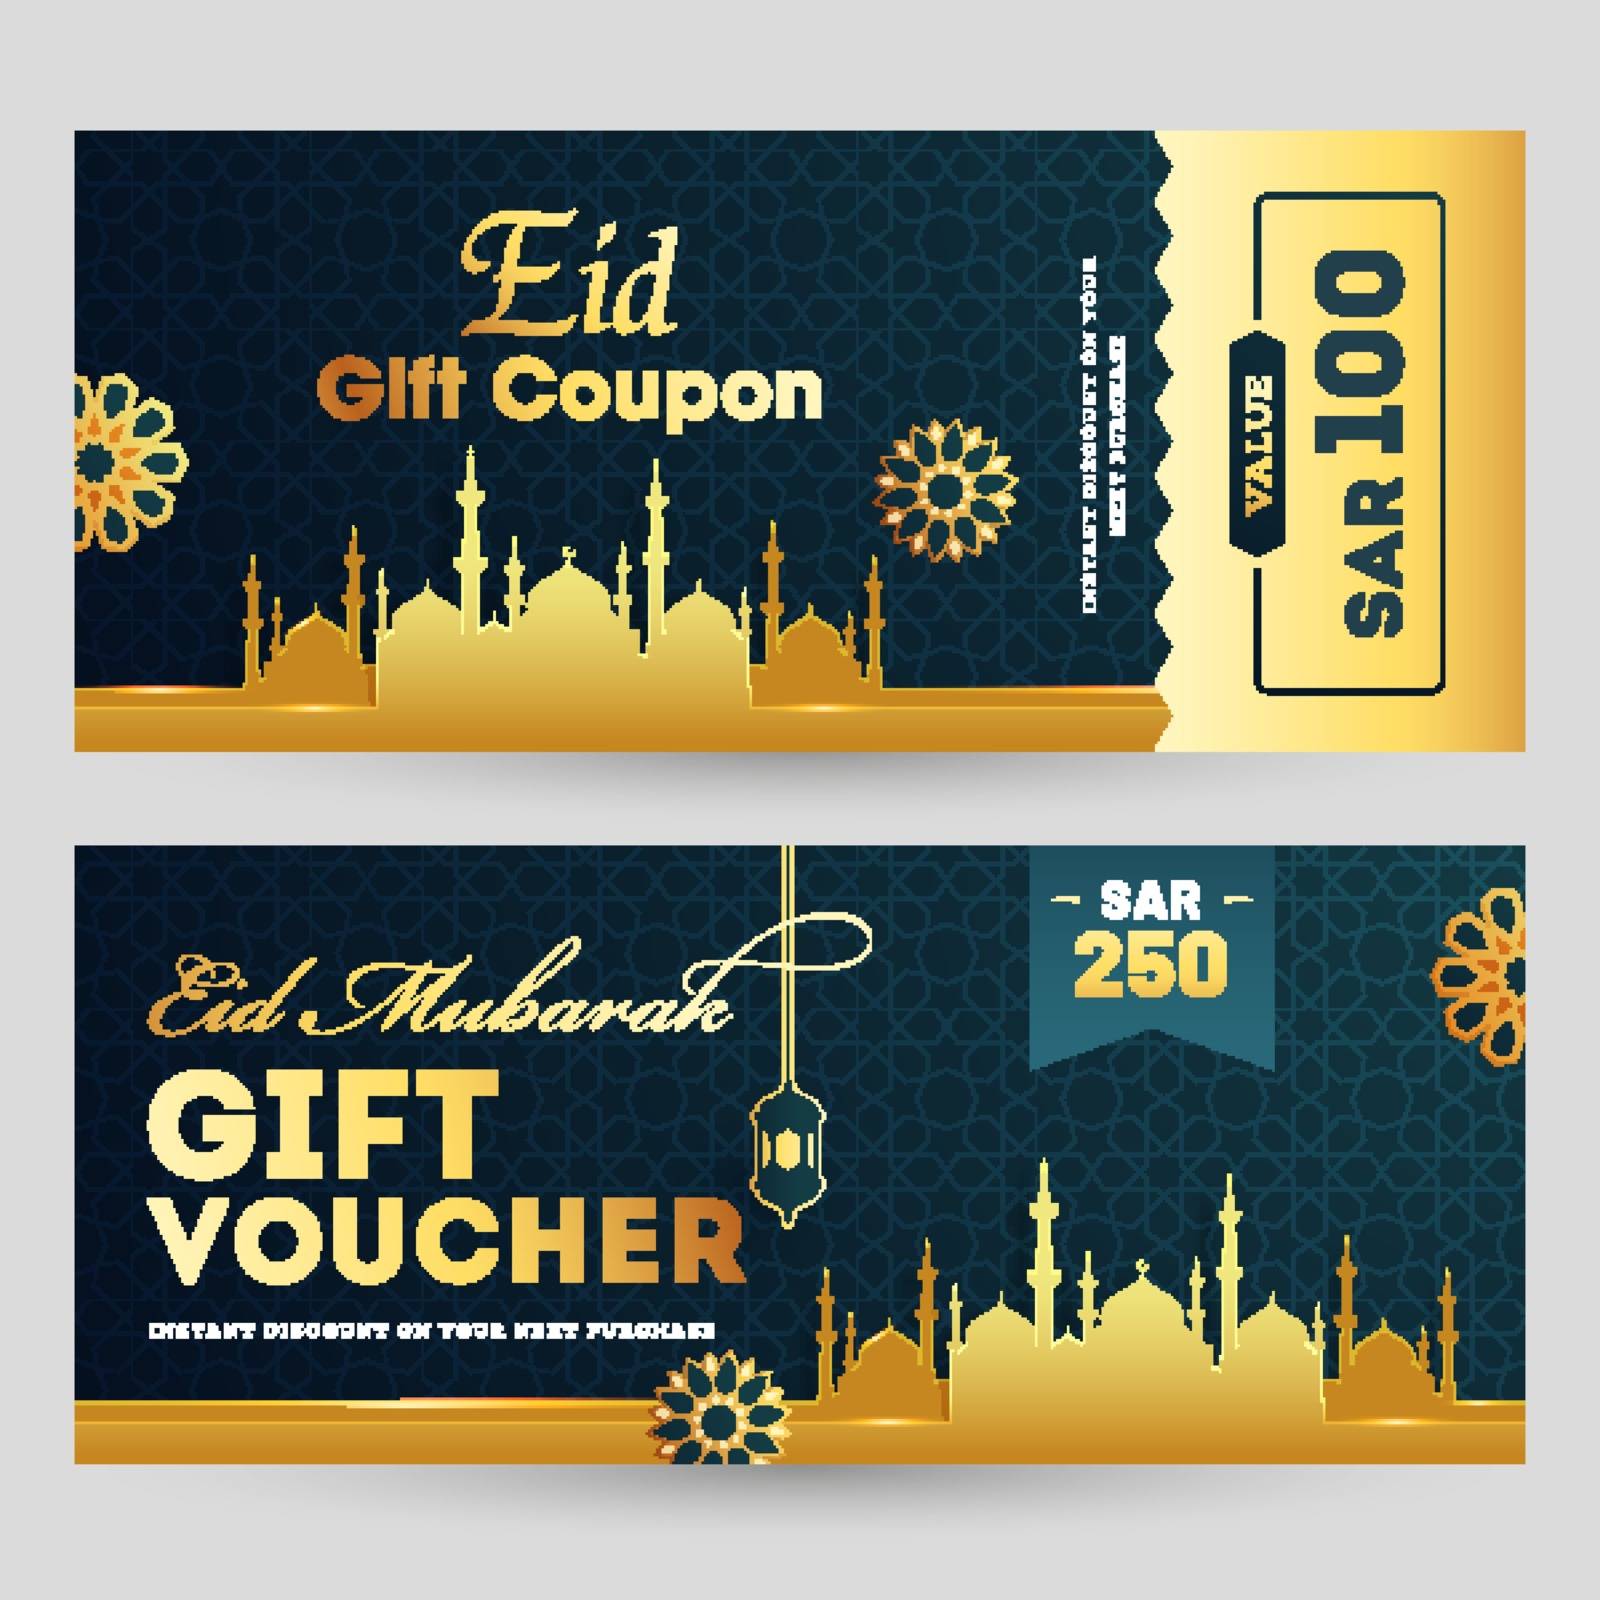 Eid Mubarak gift coupon or voucher front and back design with decoration of golden mosque on green background.